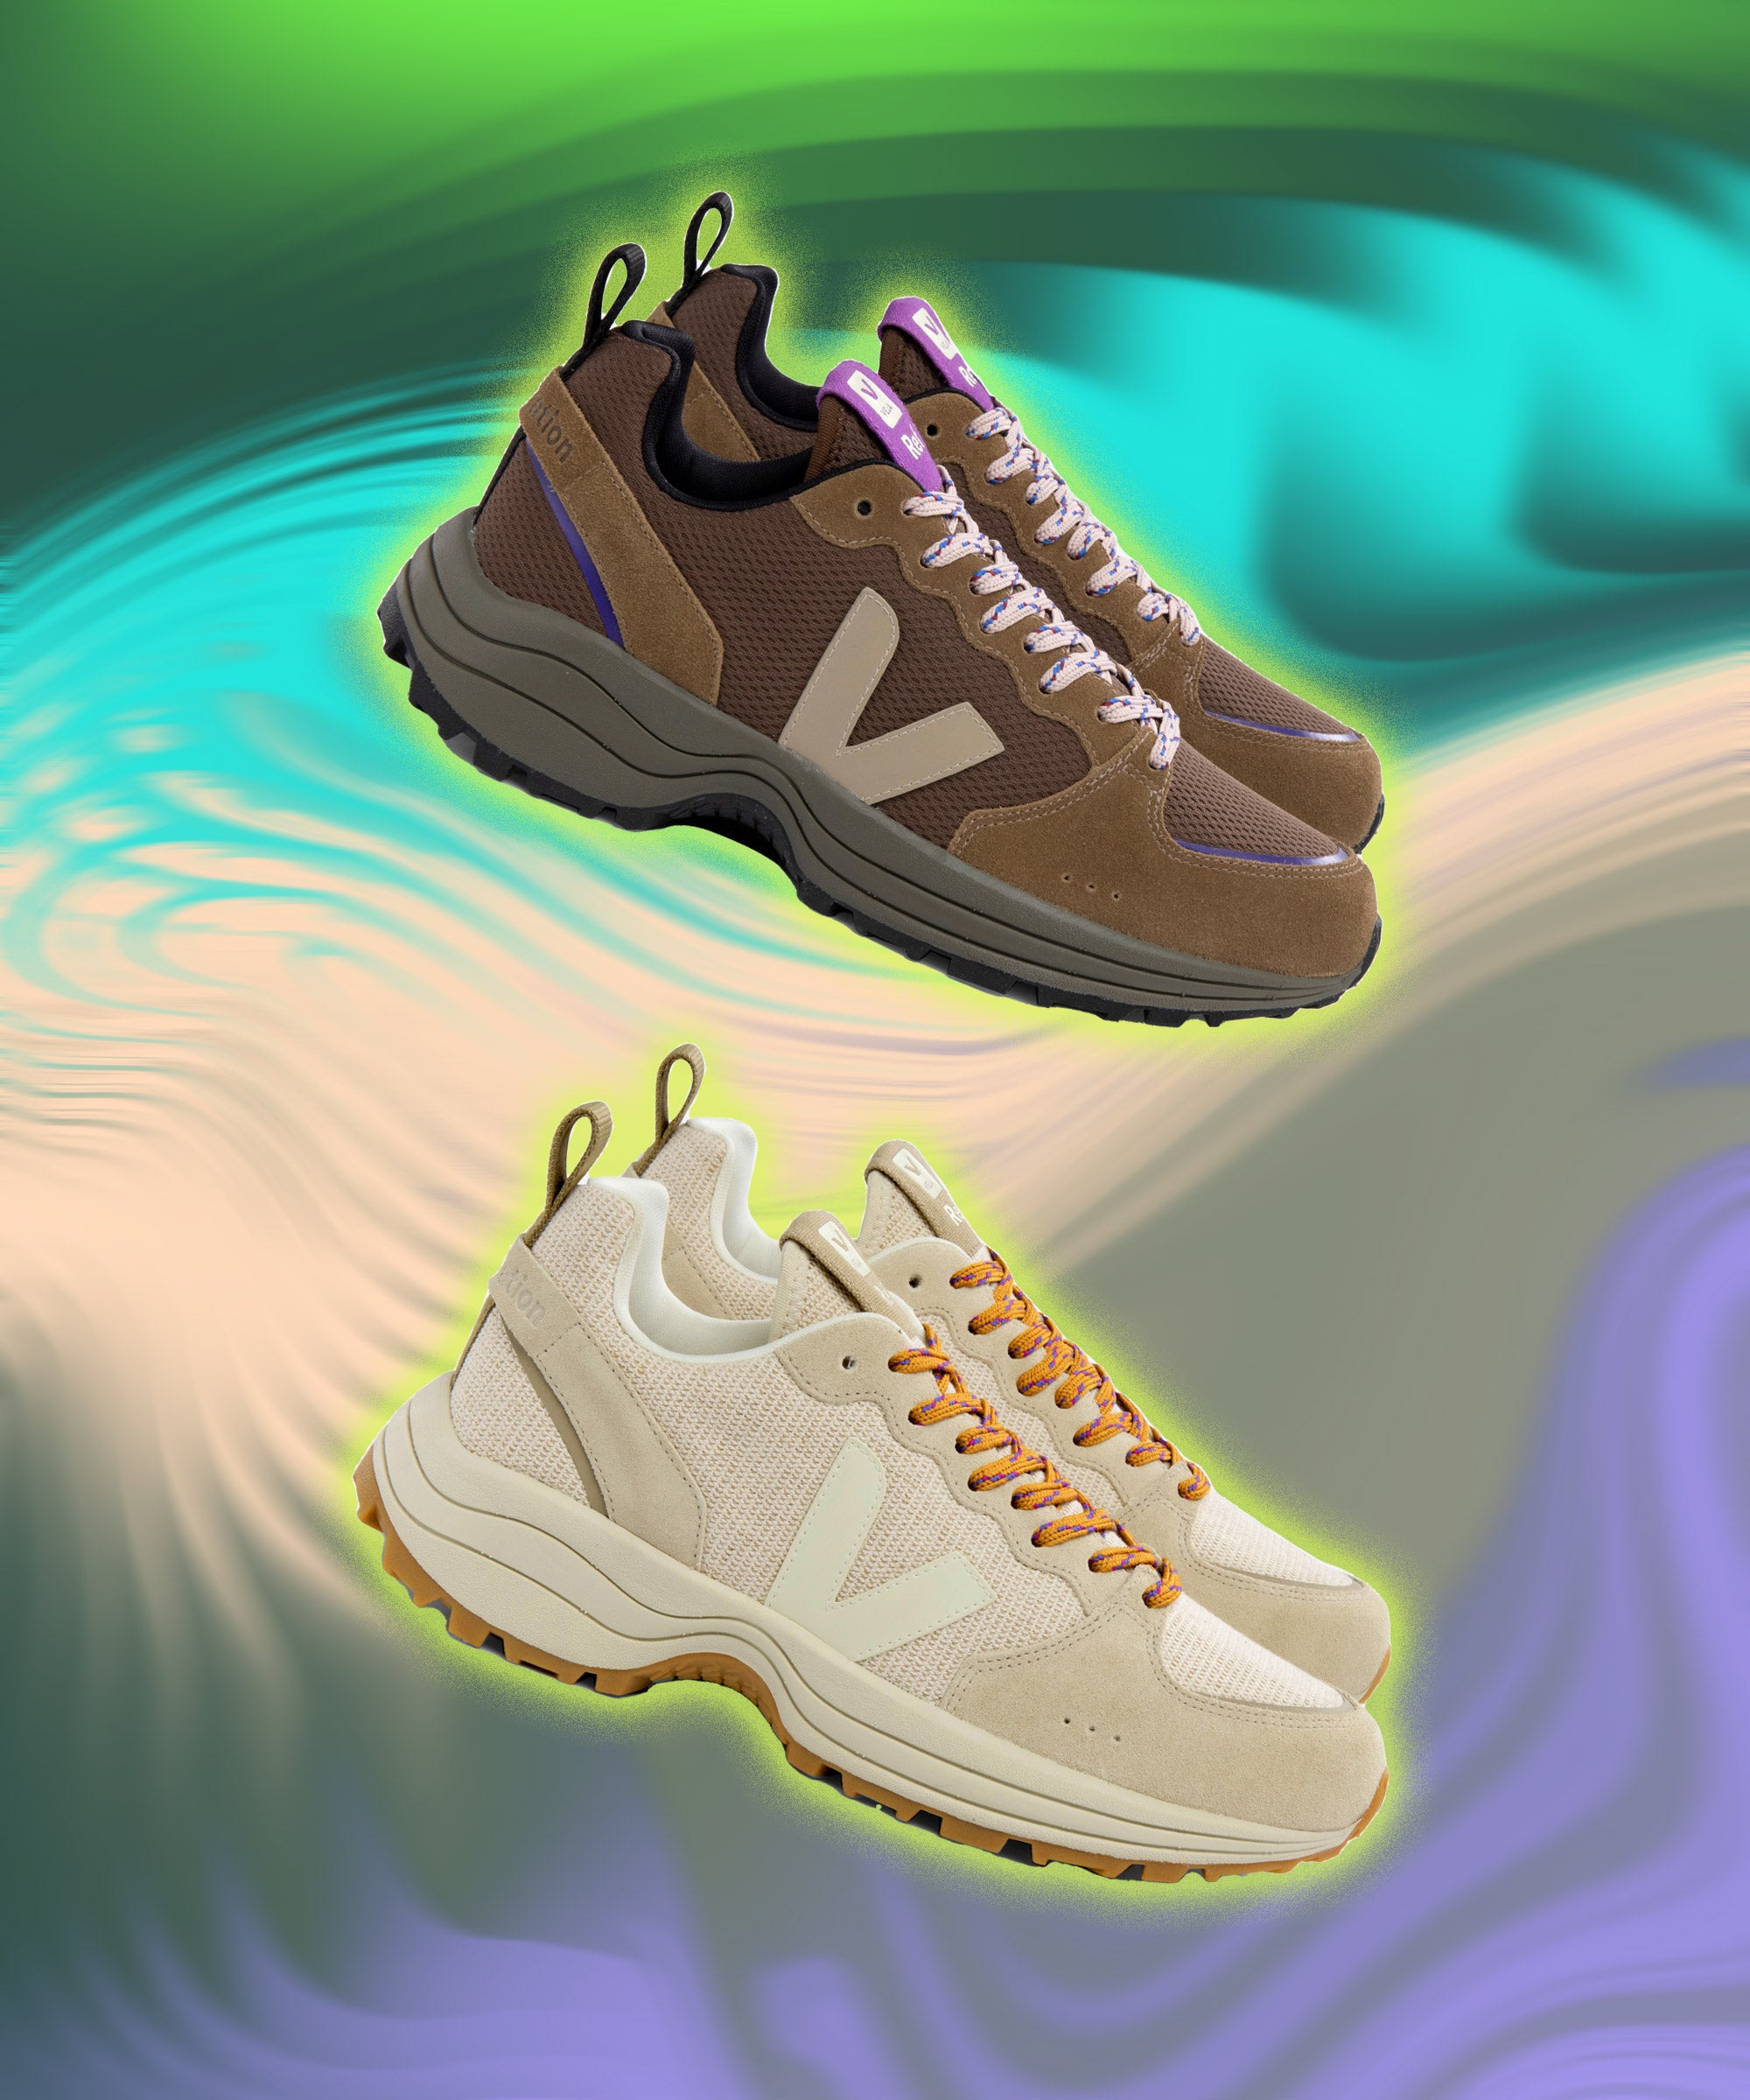 Colored Sneakers Are Taking Over From Neutral Shoe Options In 2023